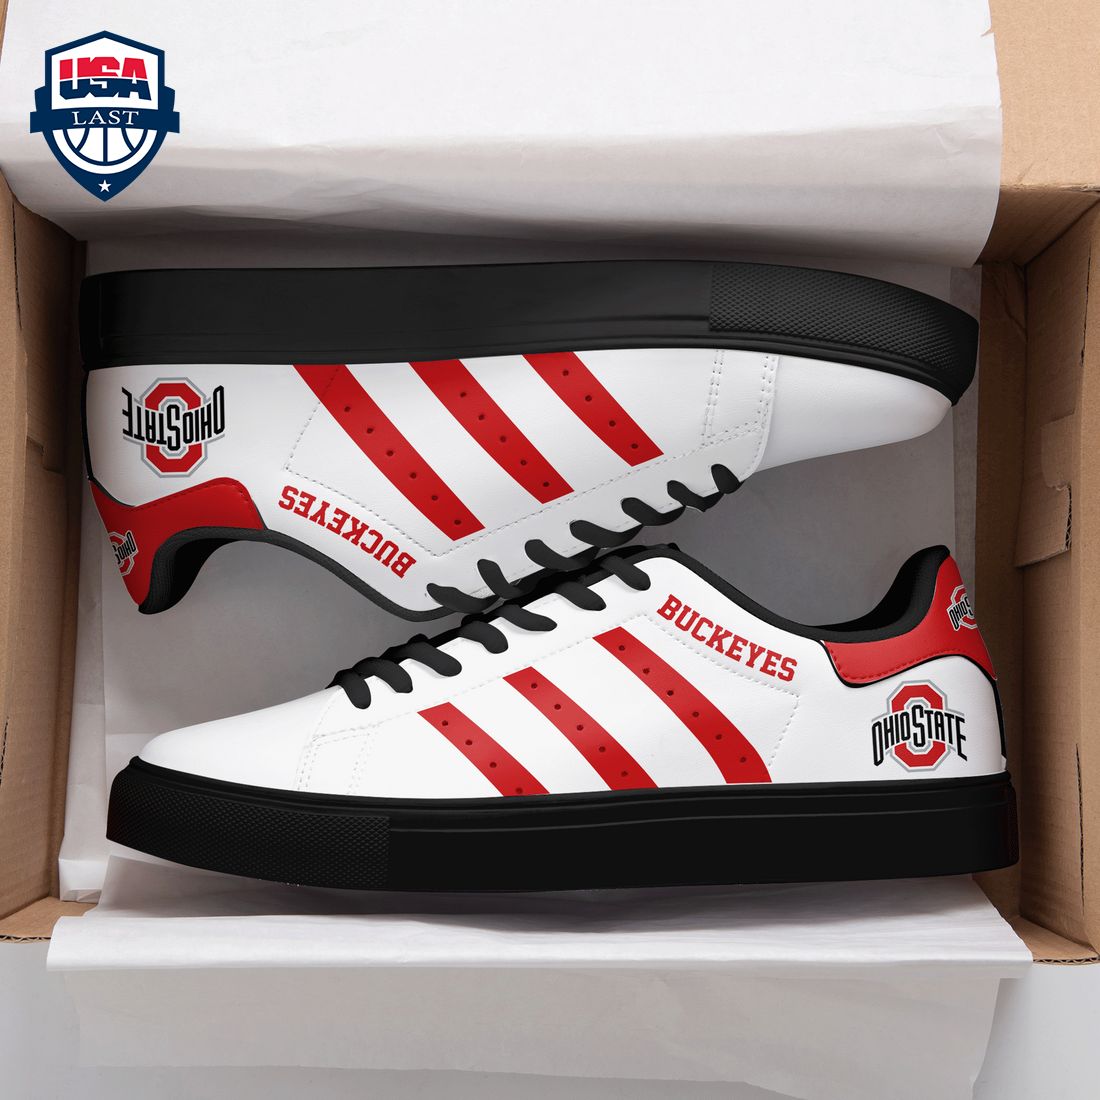 ohio-state-buckeyes-red-stripes-stan-smith-low-top-shoes-1-4ry4m.jpg